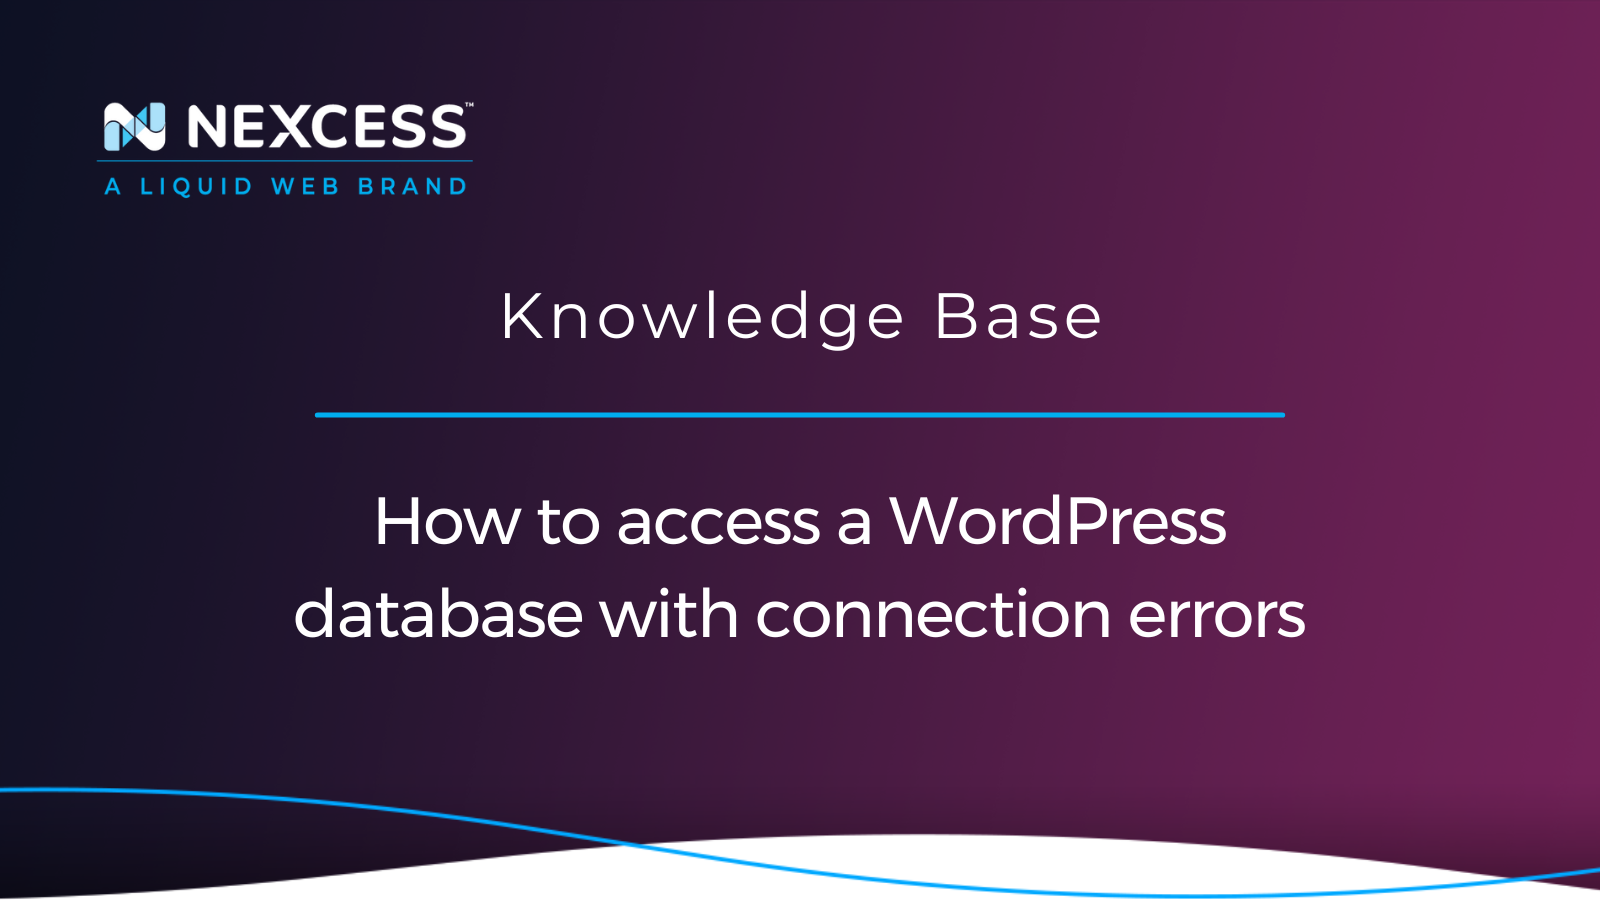 How to access a WordPress database with connection errors